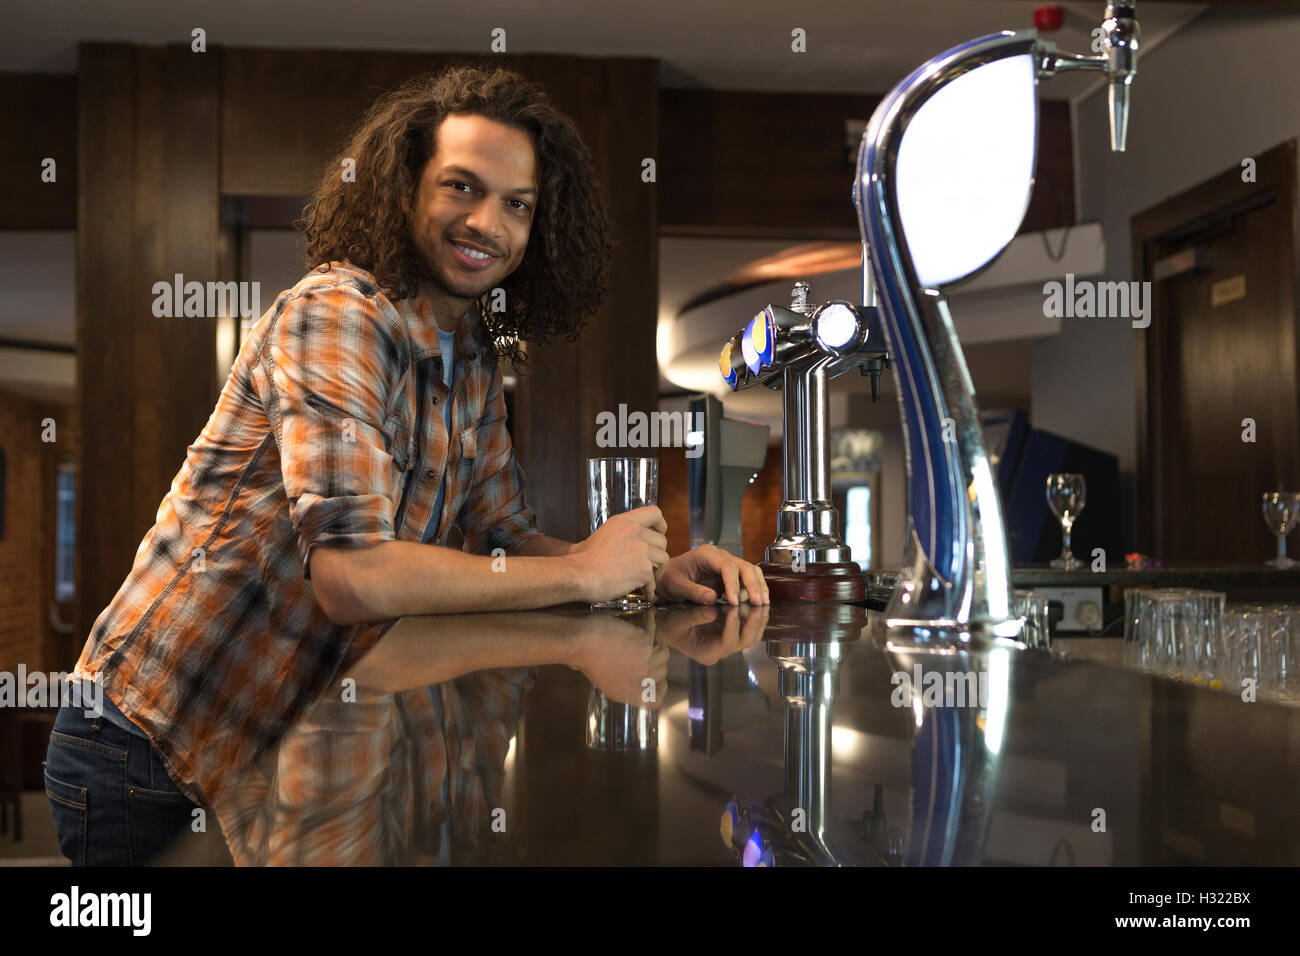 Young man standing at a bar with a pint, smiling for the camera. Stock Photo